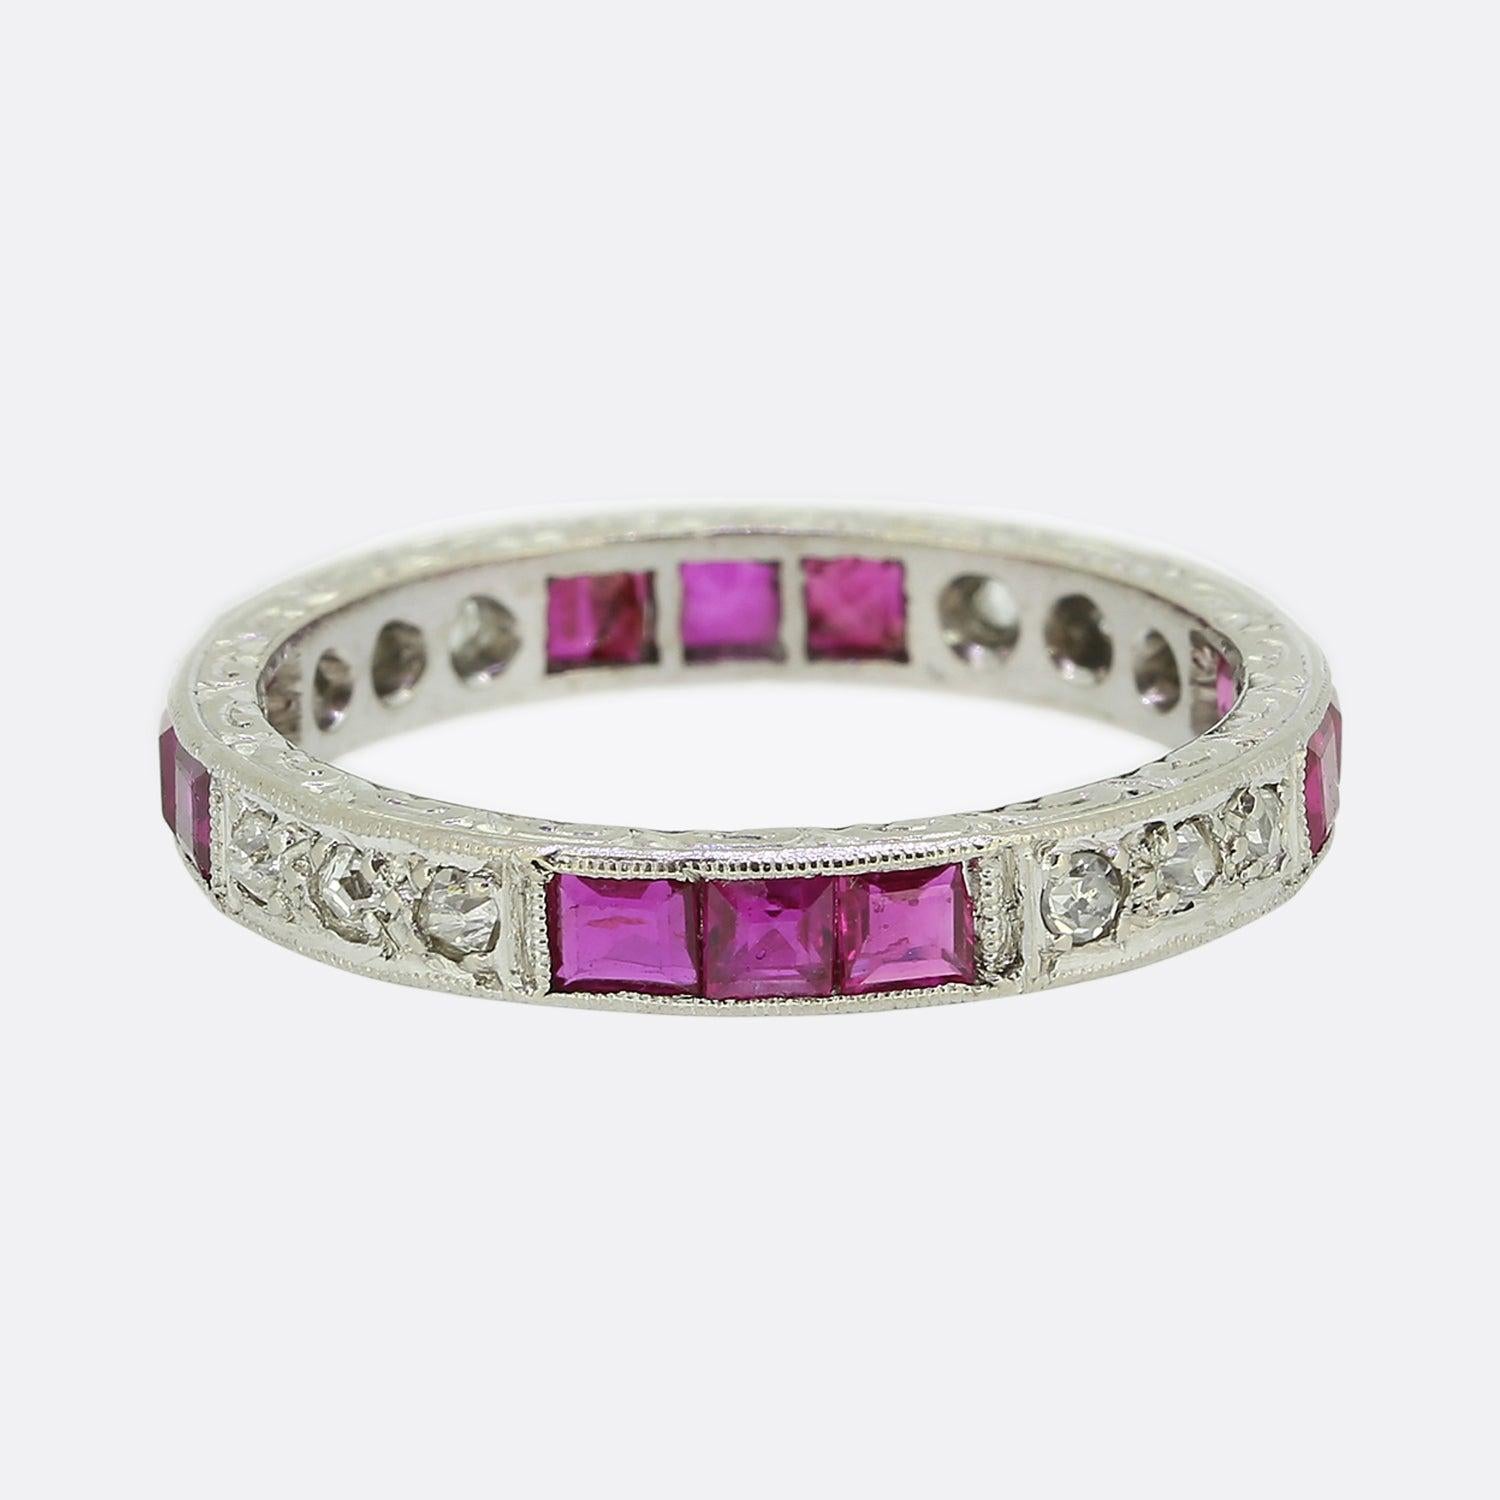 Here we have an elegant antique ruby and diamond full eternity ring. The band here has been crafted from platinum and plays host to alternating trios of square calibrated pink rubies and round faceted white old cut diamonds. A fine milgrain